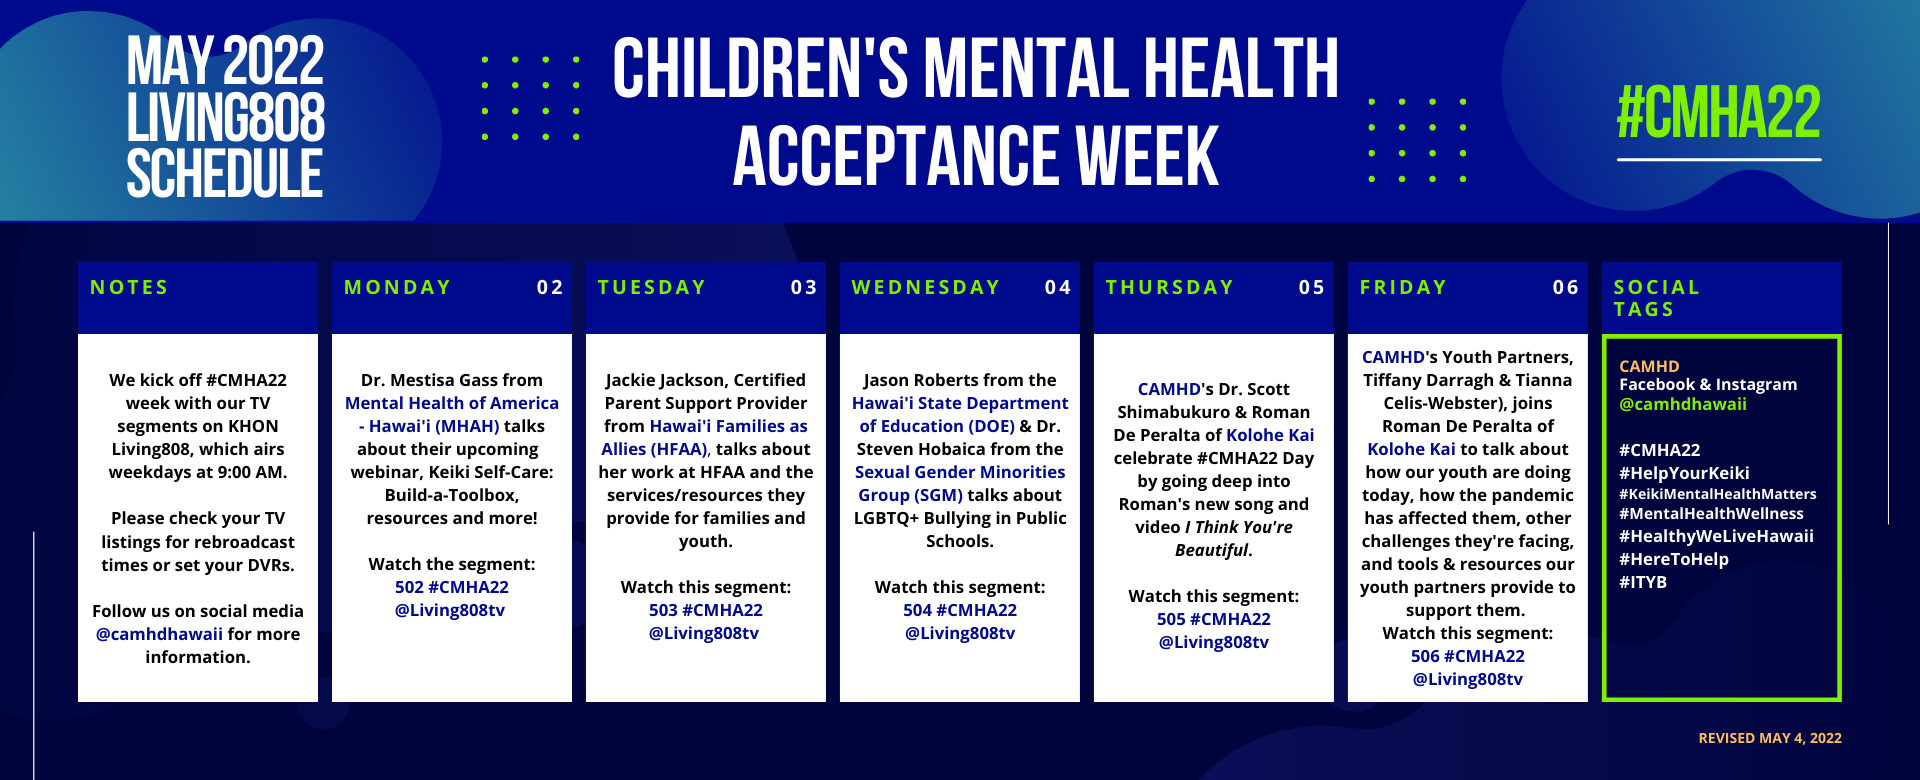 2022 Children's Mental Health Acceptance Week TV Schedule on KHON Living808 (as of May 7, 2022)